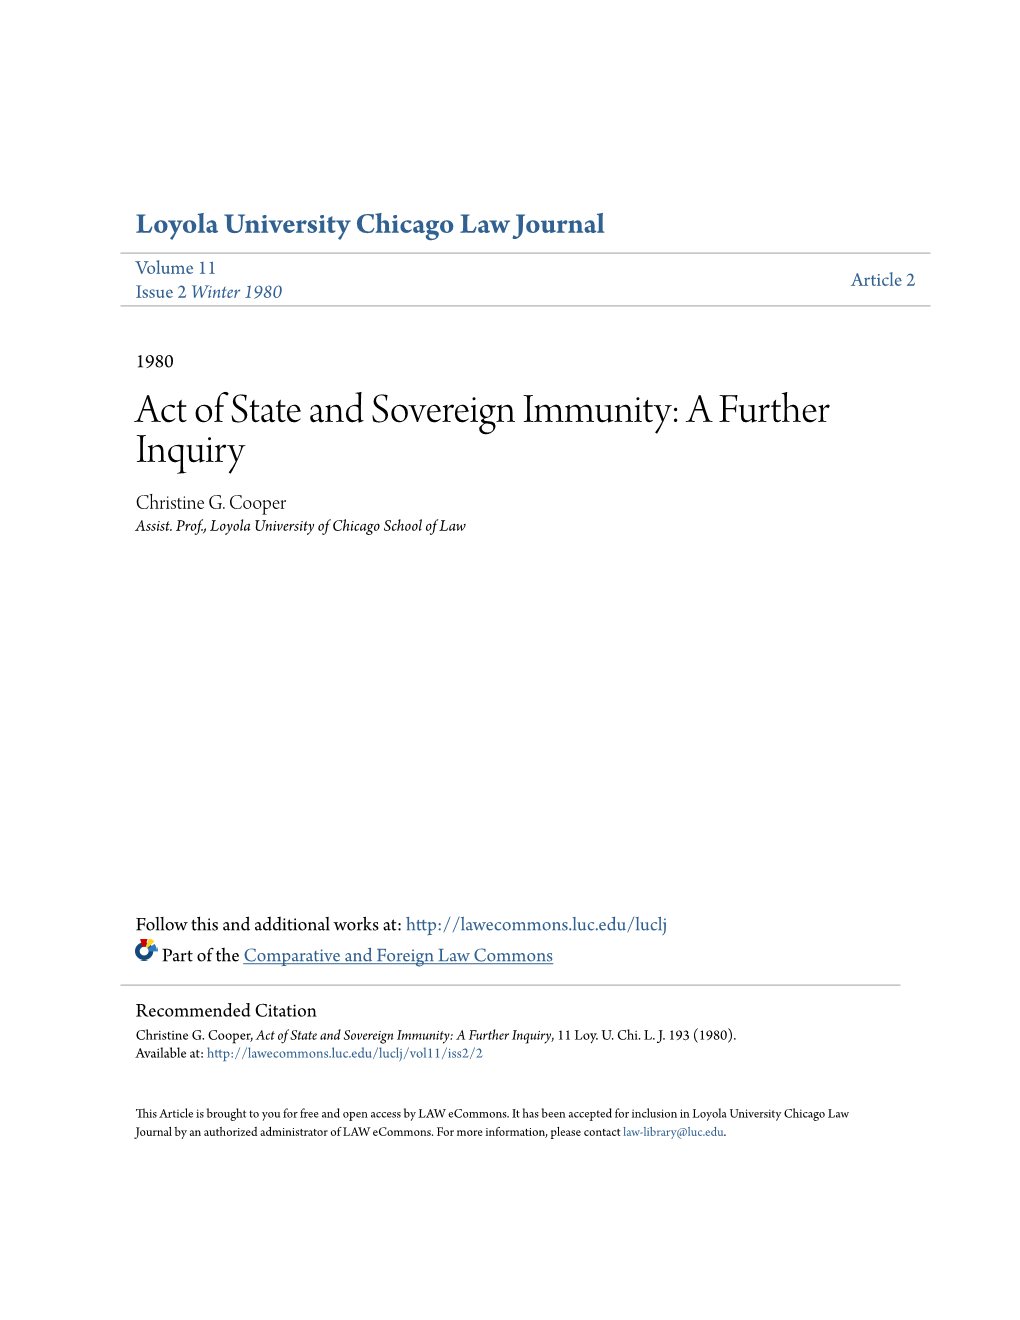 Act of State and Sovereign Immunity: a Further Inquiry Christine G